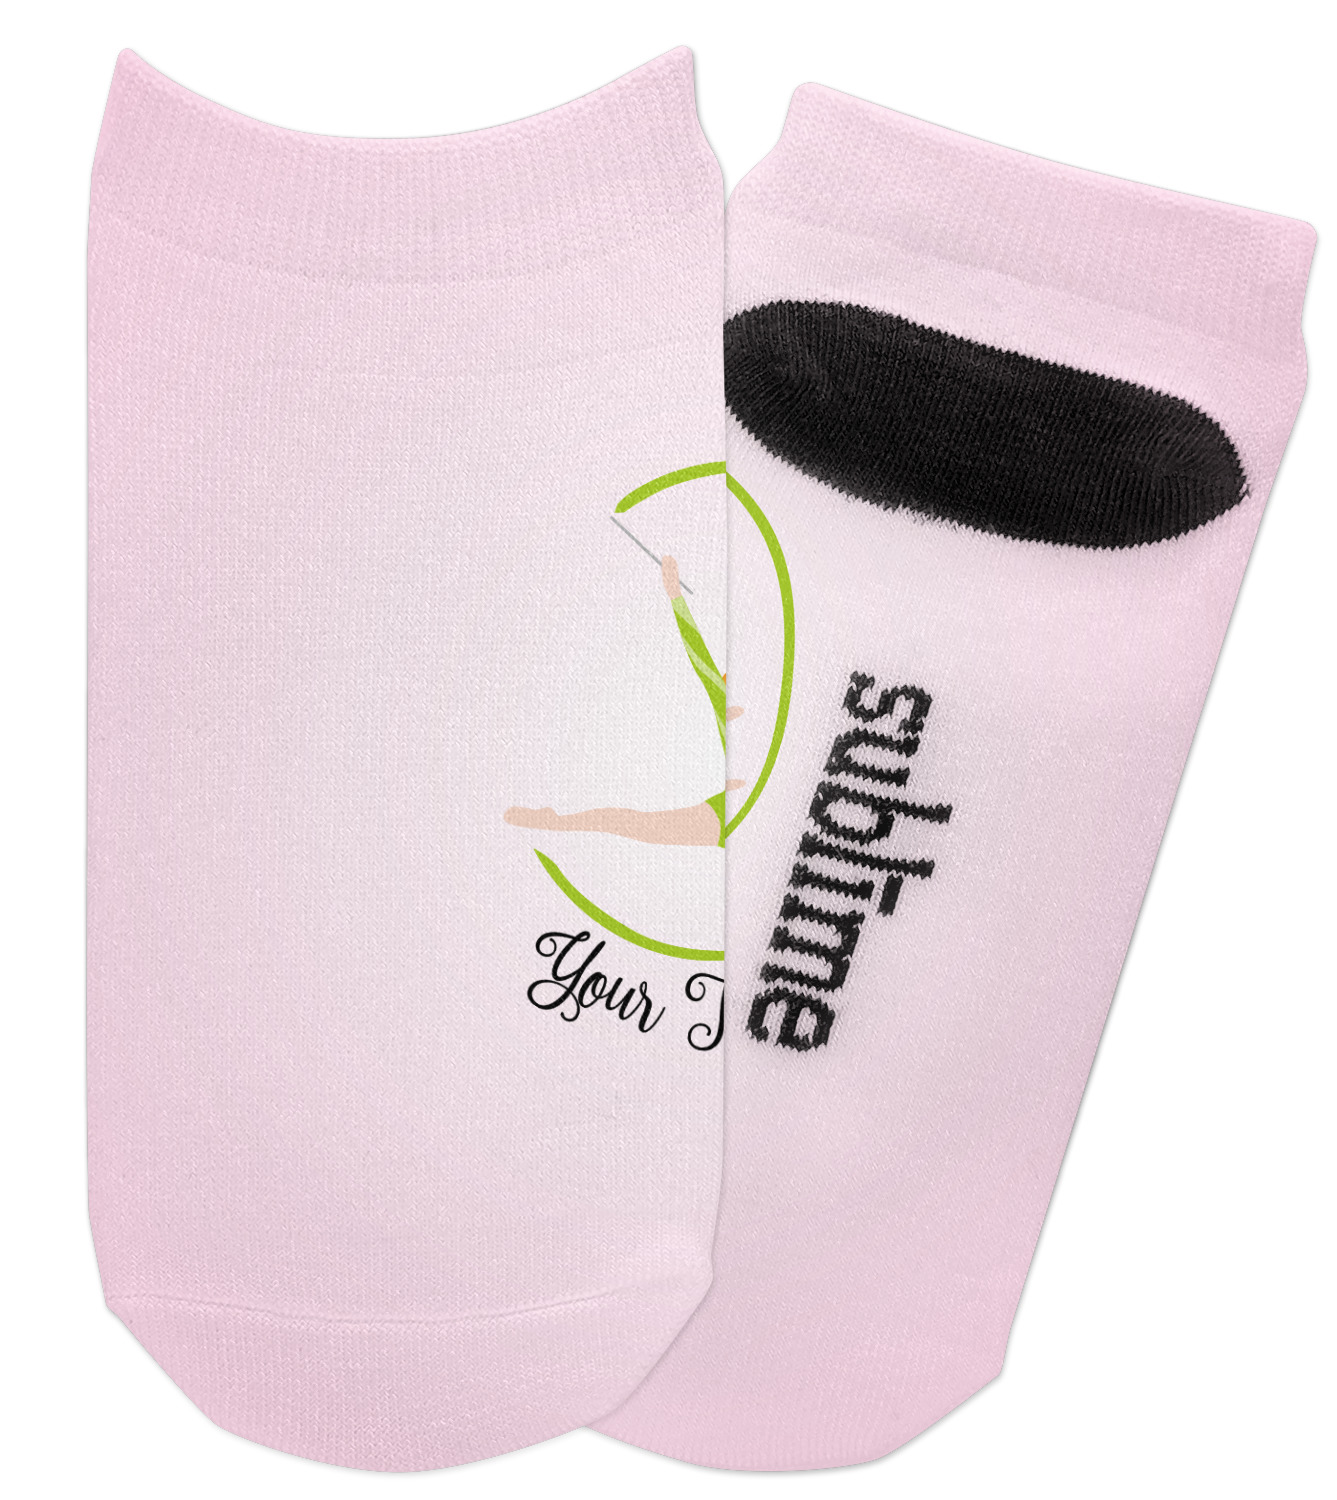 https://www.youcustomizeit.com/common/MAKE/2955992/Gymnastics-with-Name-Text-Adult-Ankle-Socks-Single-Pair-Front-and-Back.jpg?lm=1586114253